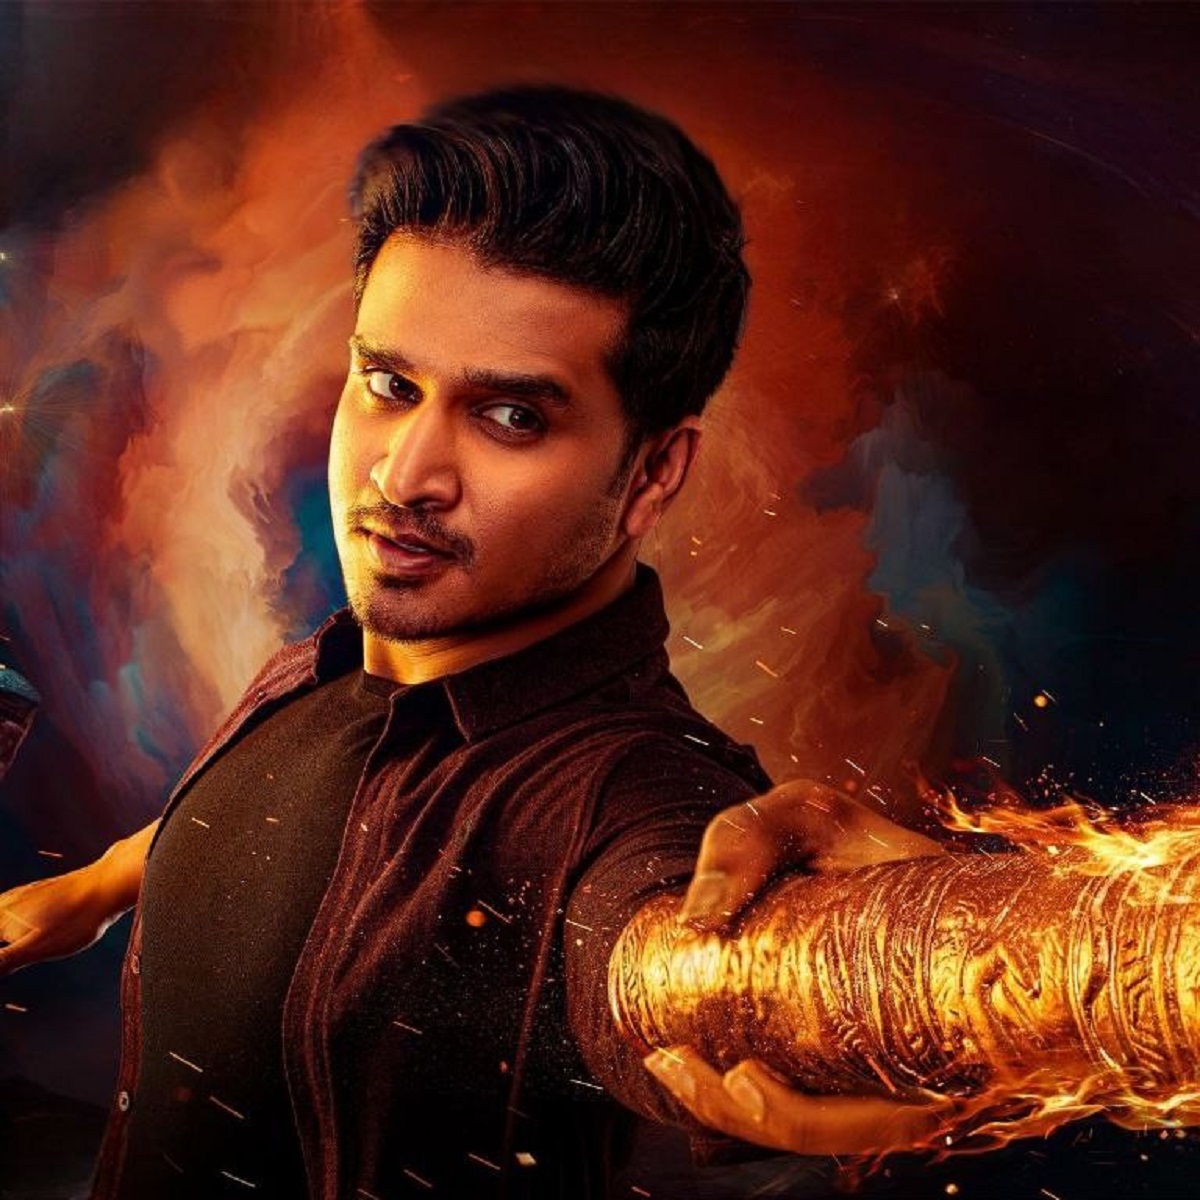 Karthikeya 2 box office collections; Collects Rs. 33 crores in first week in India